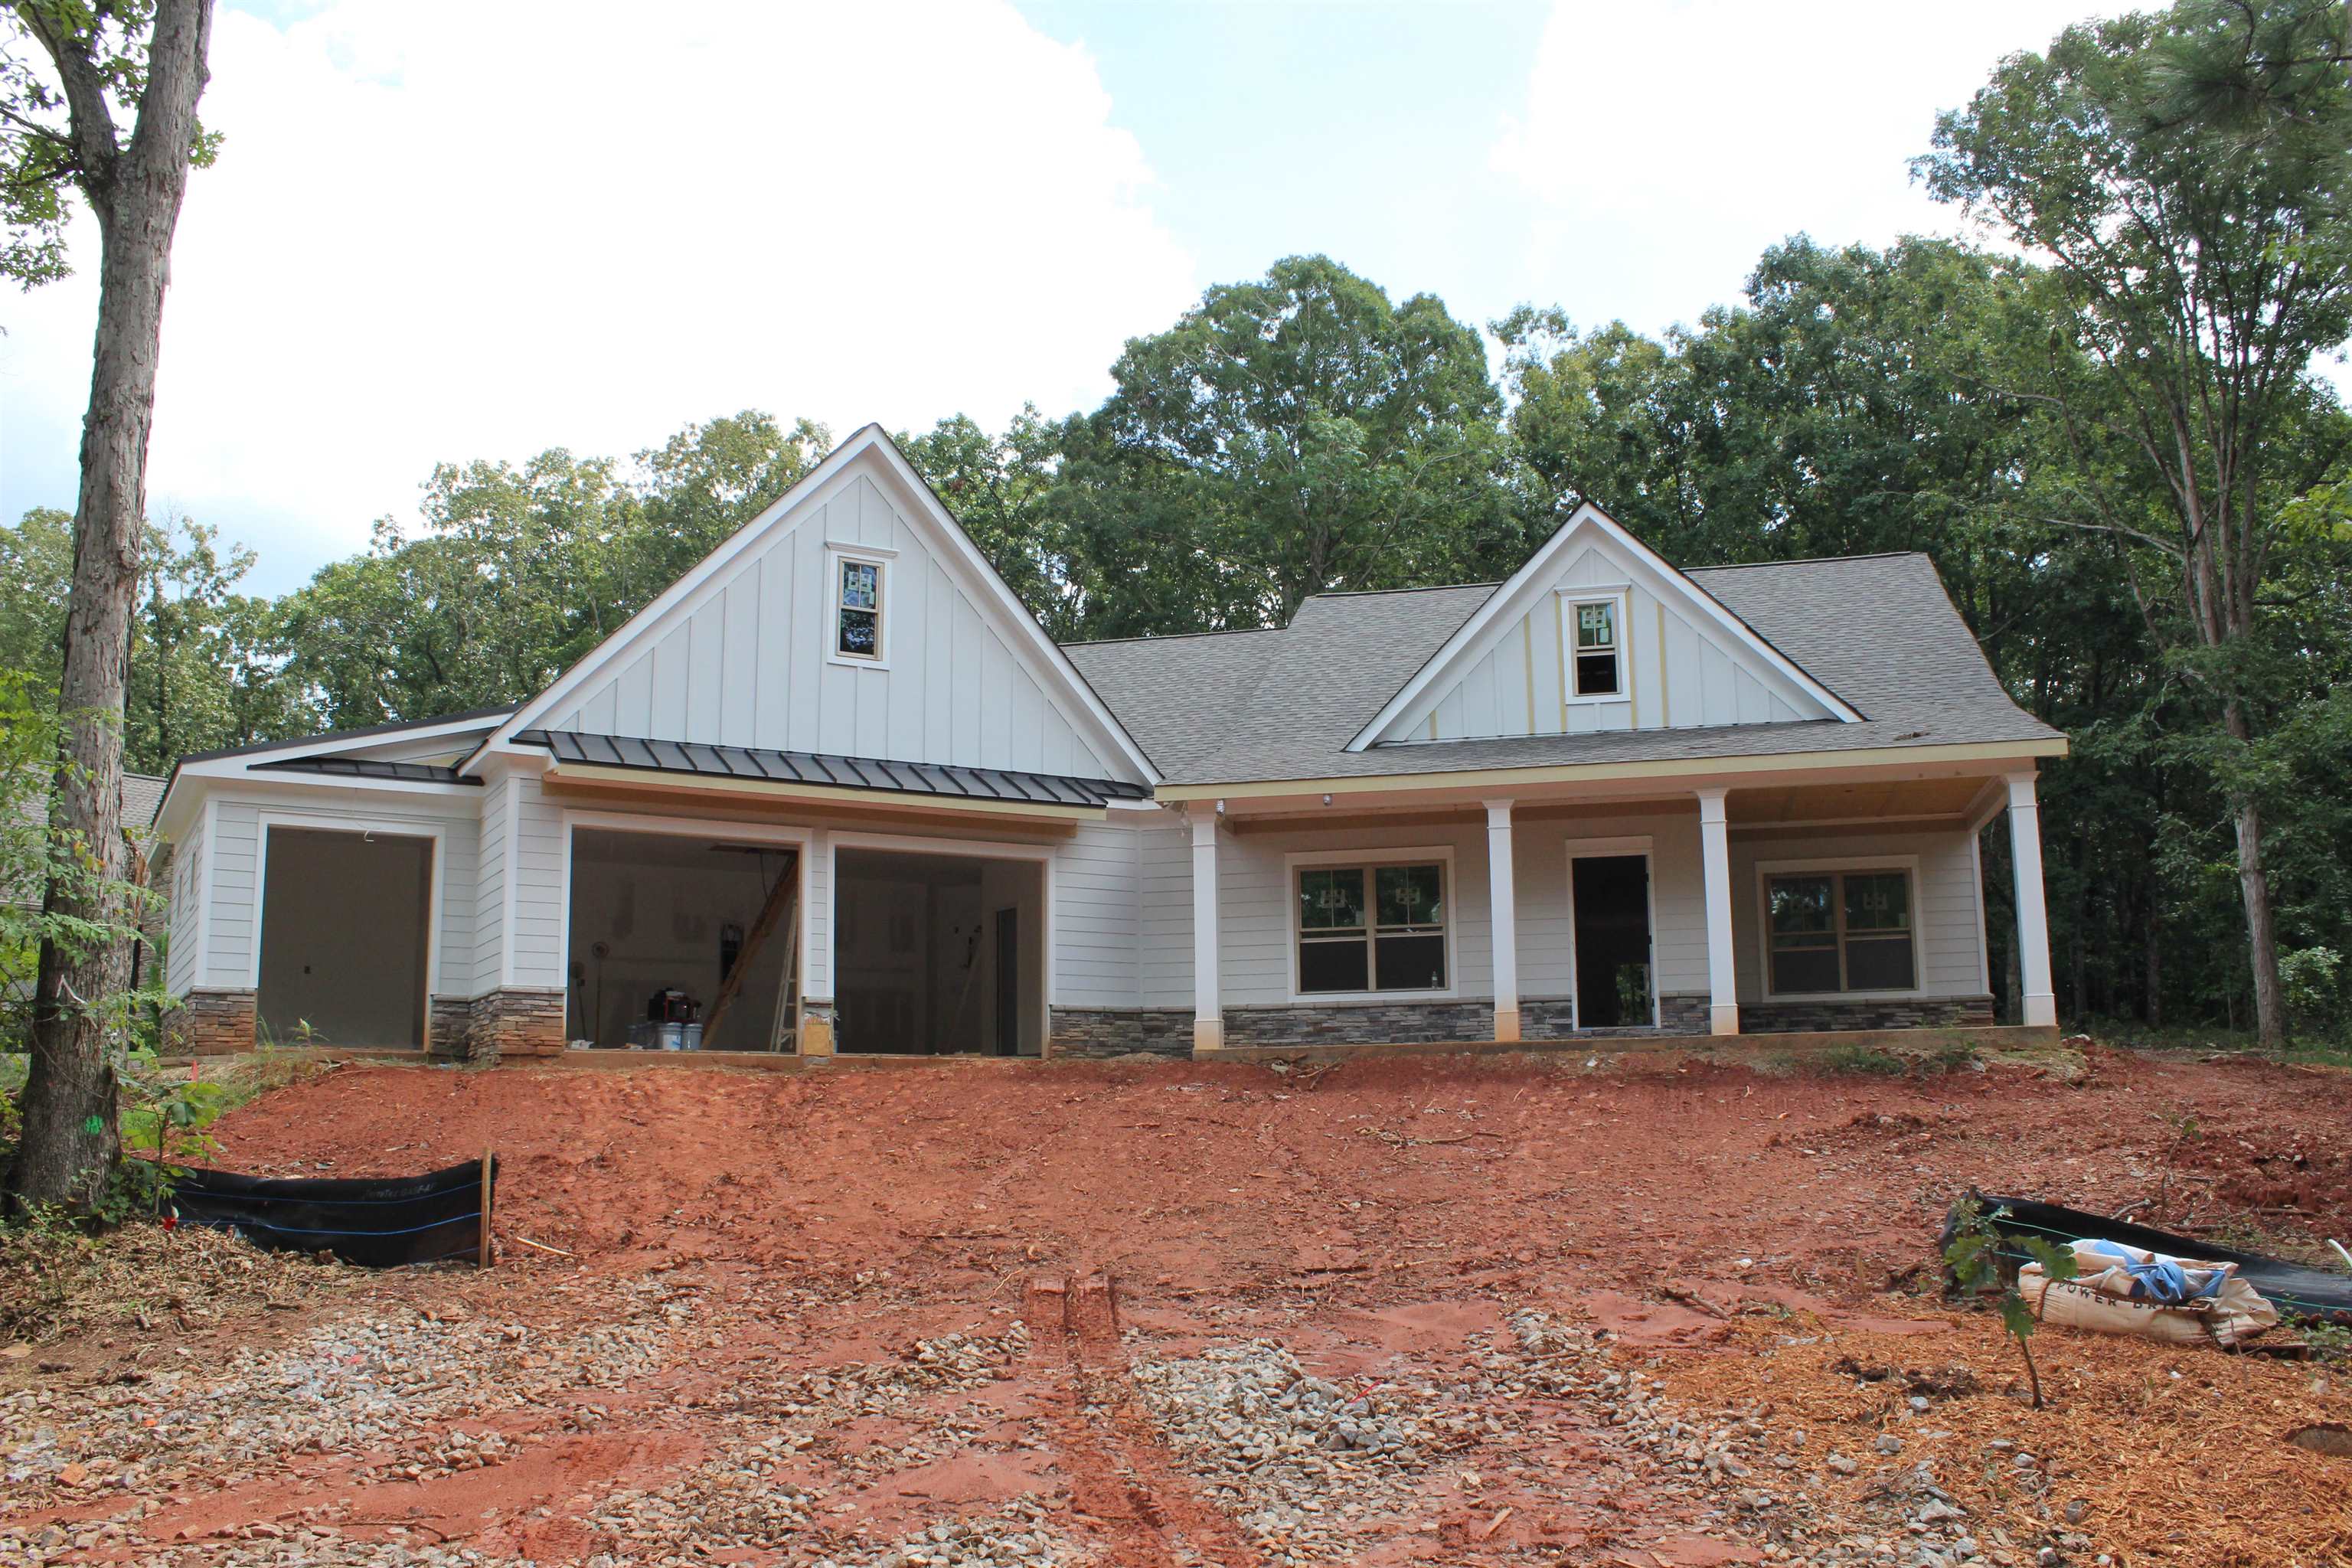 New construction in Parkside at Cuscowilla.  This 4 BR / 3.5 BA home is located on an elevated lot across the street a park with a pond.  The open modern floor plan flows from the kitchen into the living room with a large covered porch with and outdoor fireplace.  The master is on the main level along with an additional bedroom / suite.  There is an additional bedrooms with a shared bath upstairs. Features included granite countertops, hardwood floors, crown molding, and tiled baths.  Located only a short golf cart ride away from the Clubhouse, pool and boat docks.  a Cuscowilla Golf Membership is available.